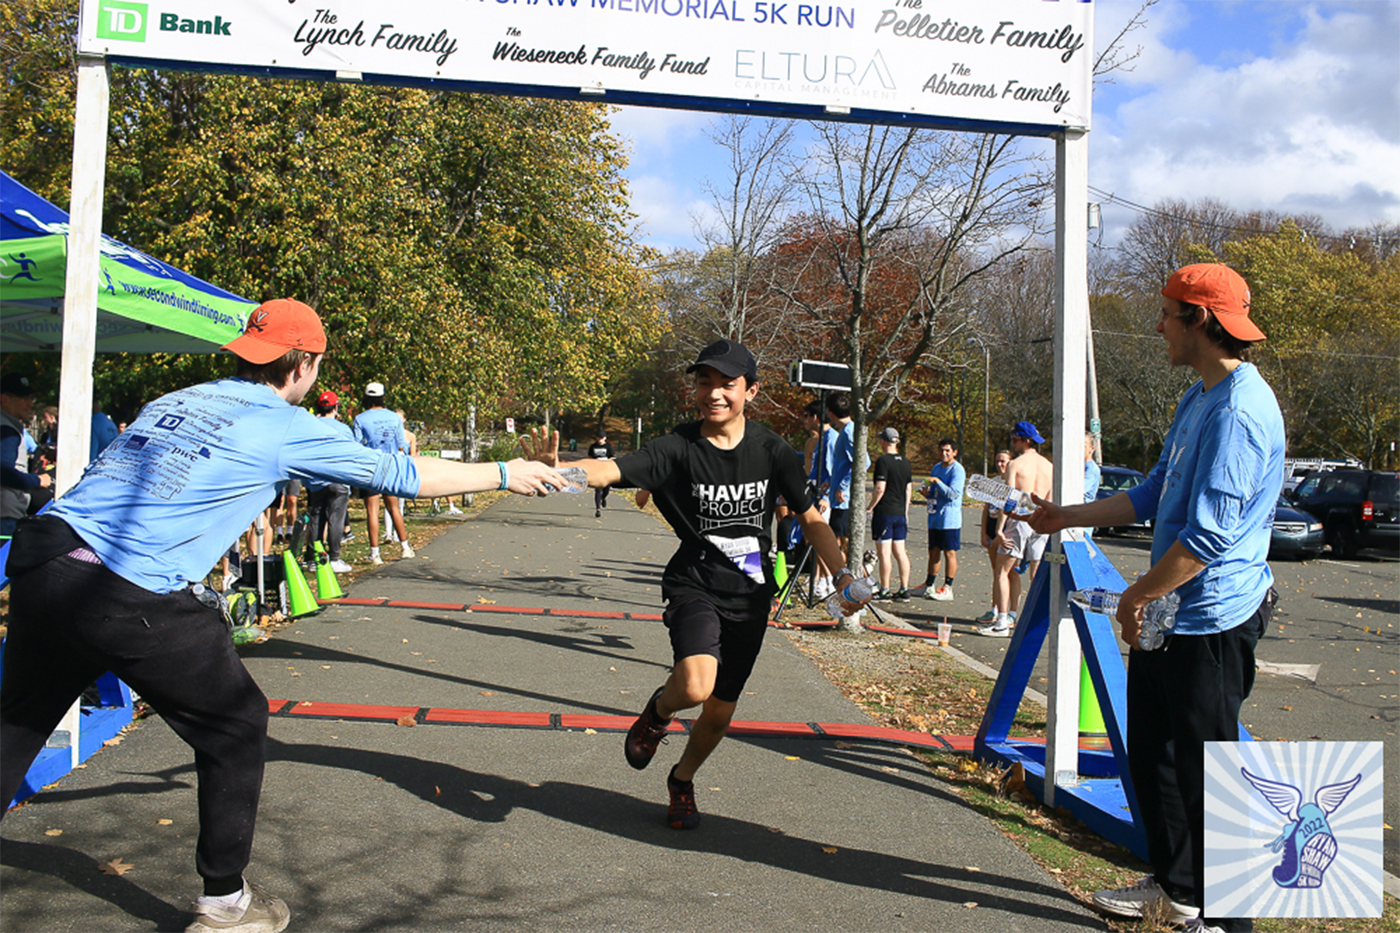 A runner crossing the finish line at the Ryan Shaw Memorial 5K.